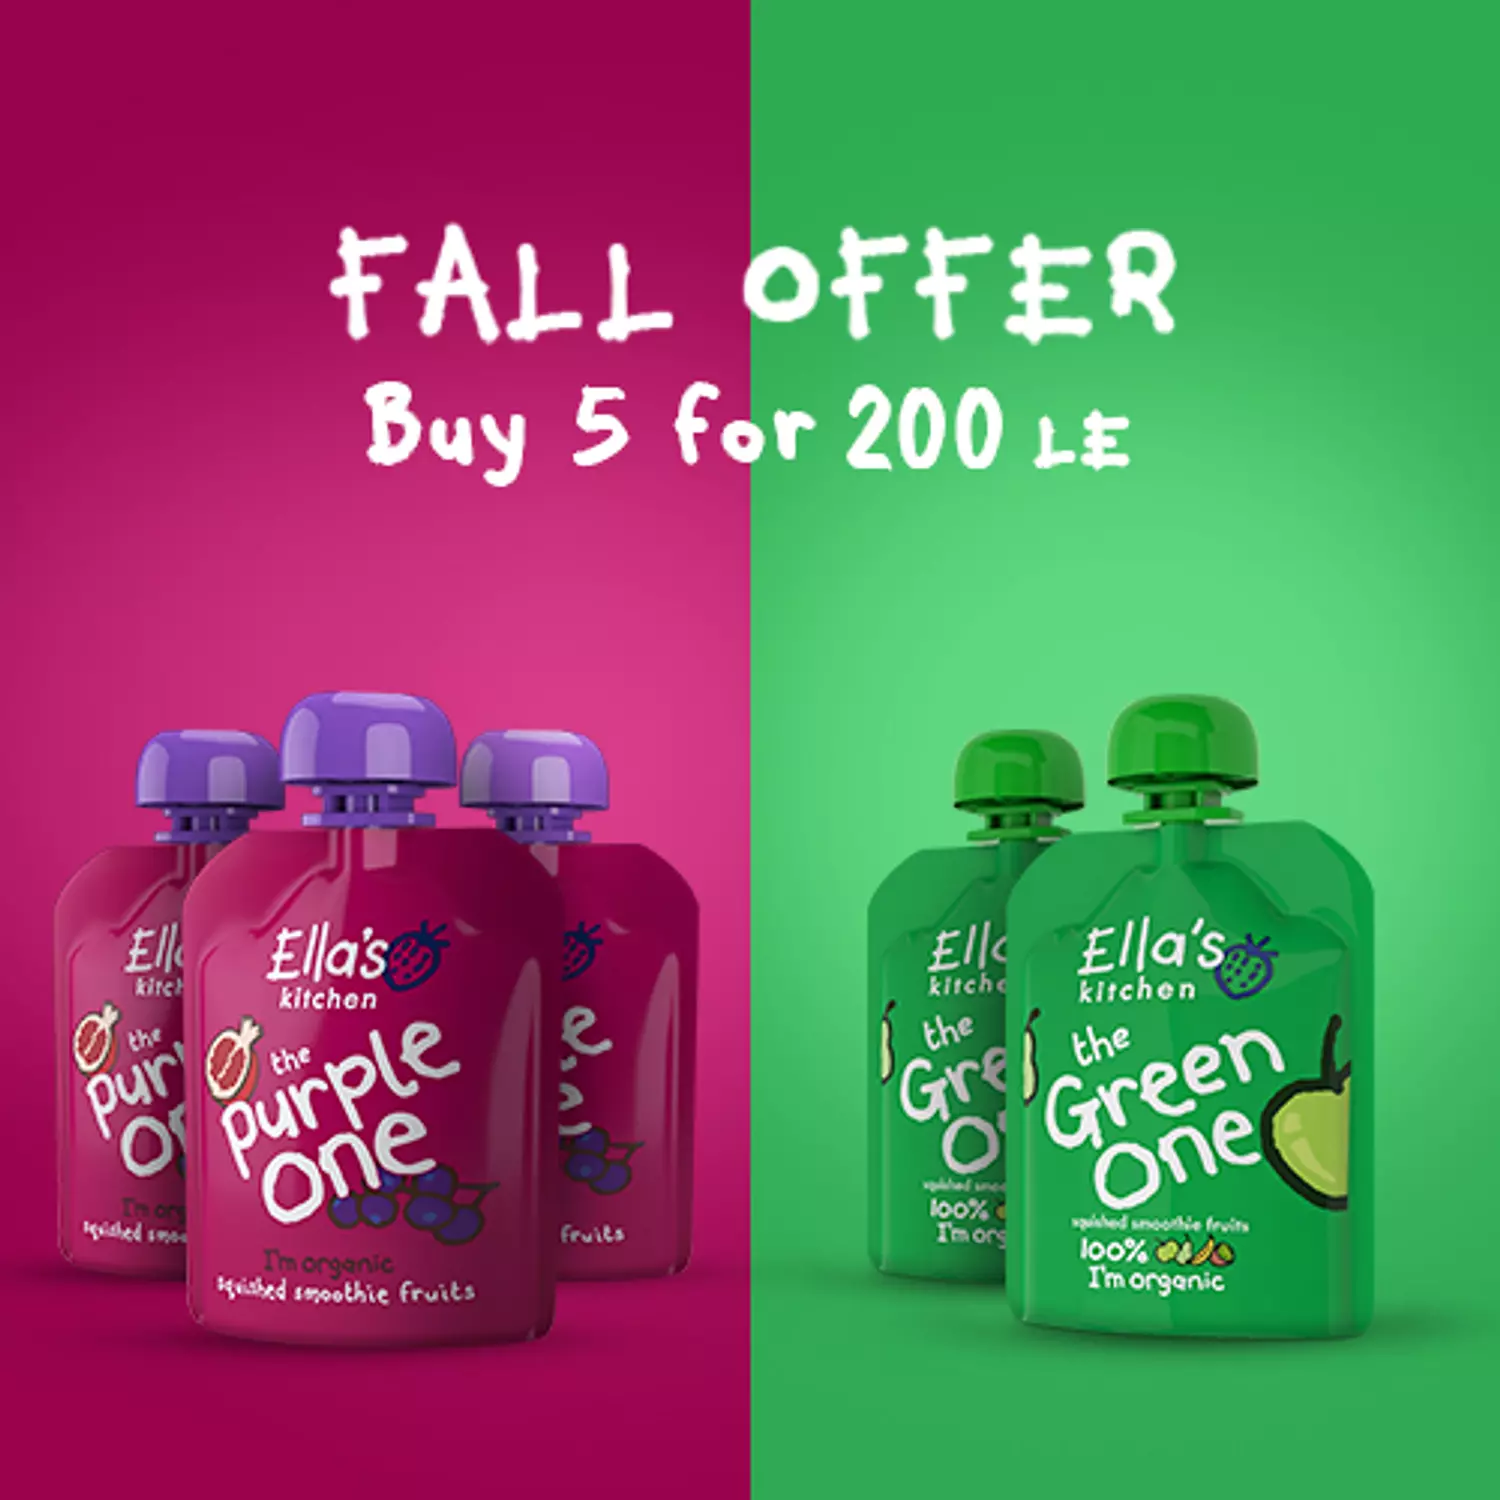 Fall Offer hover image